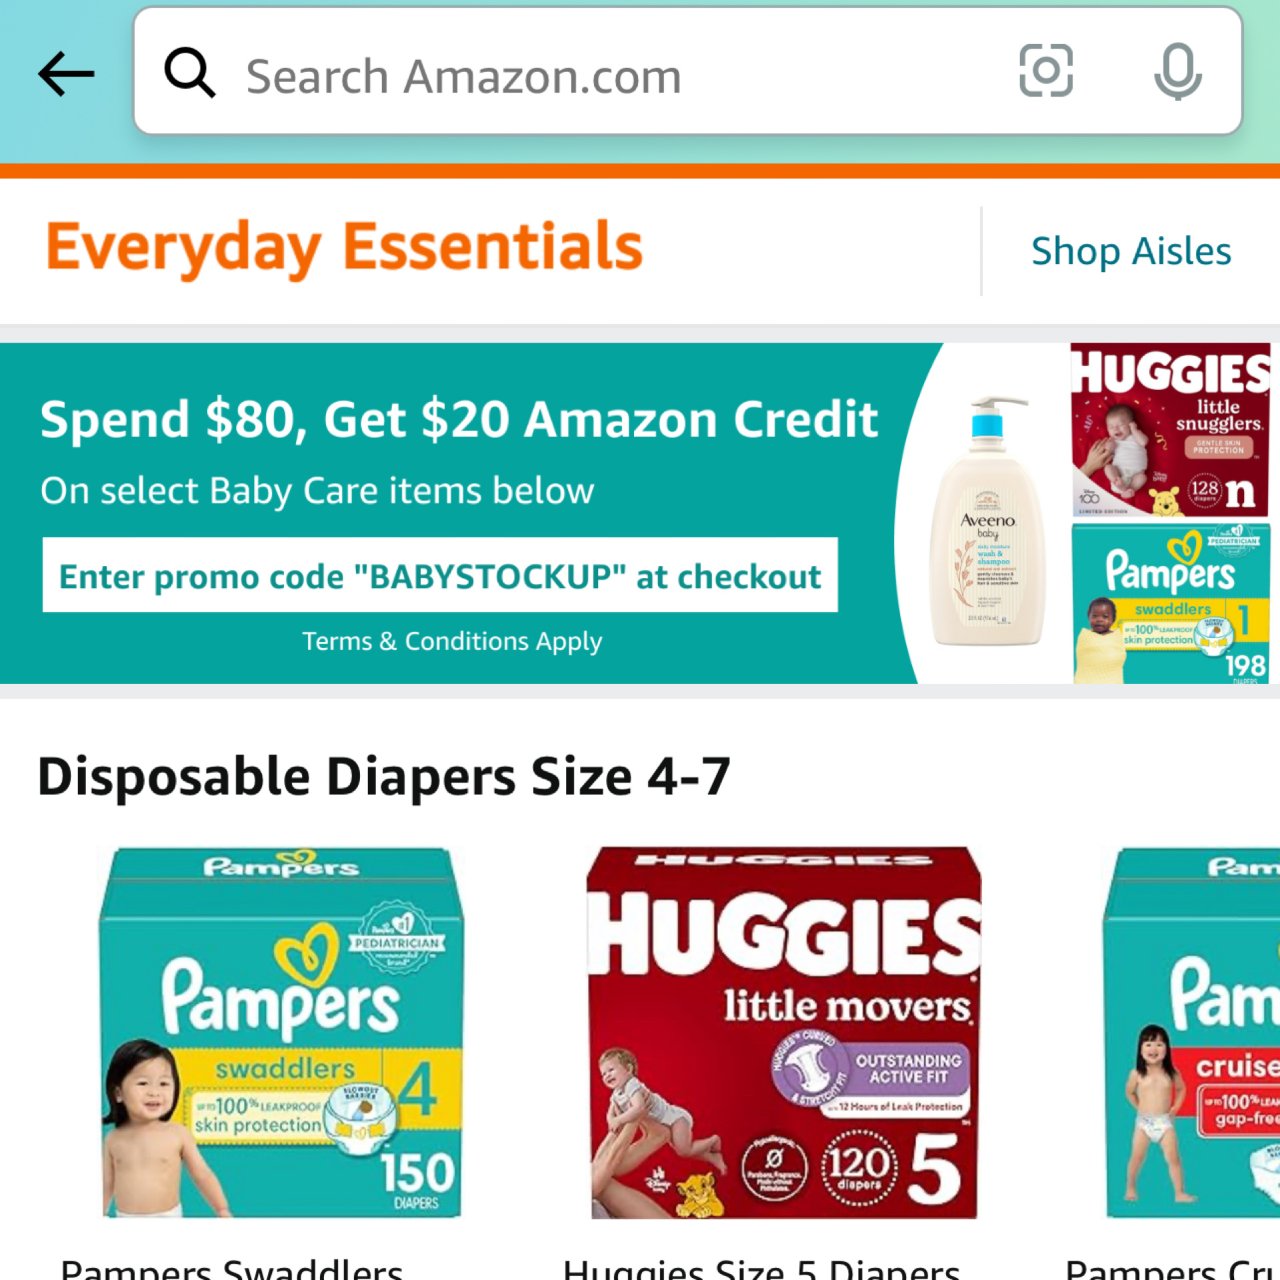 Amazon｜Pampers easy ...